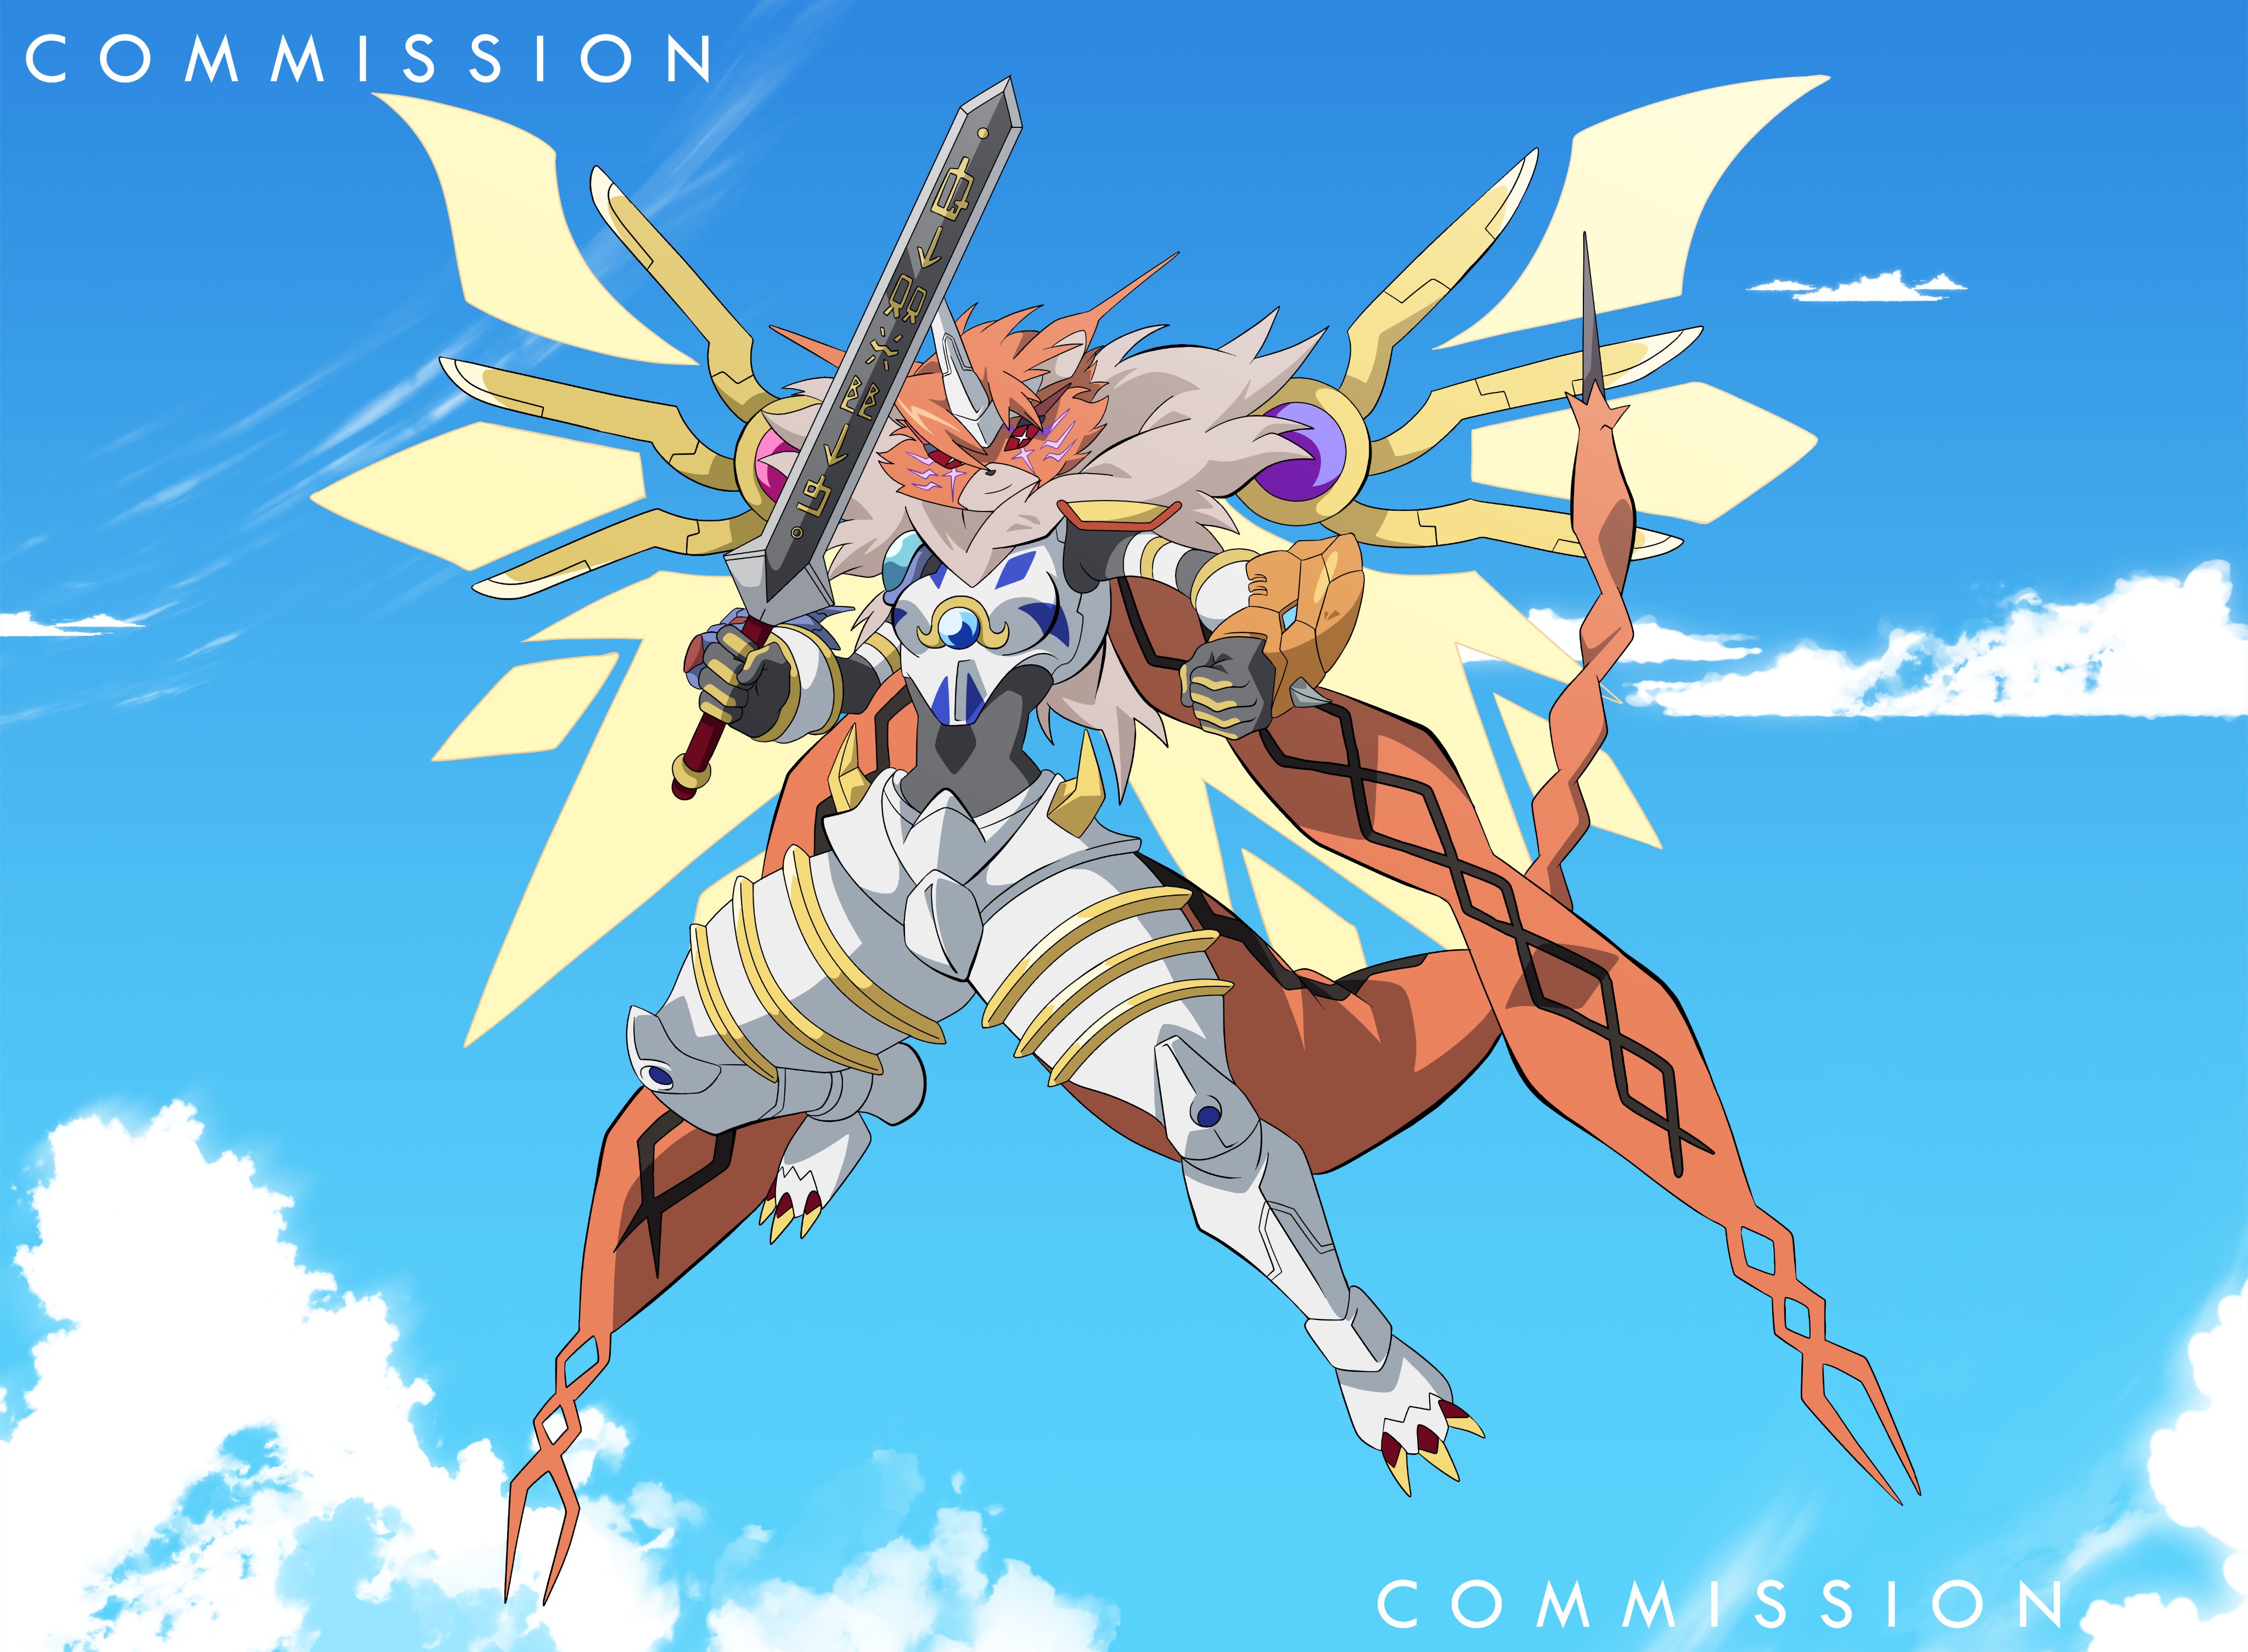 Seraphi COMMISSIONS OPEN on X:  ▪︎ Digimon Adventure Tri. 2 (Ketsui) ▪︎ Digimon  Adventure Tri. 1 (Saikai)  / X